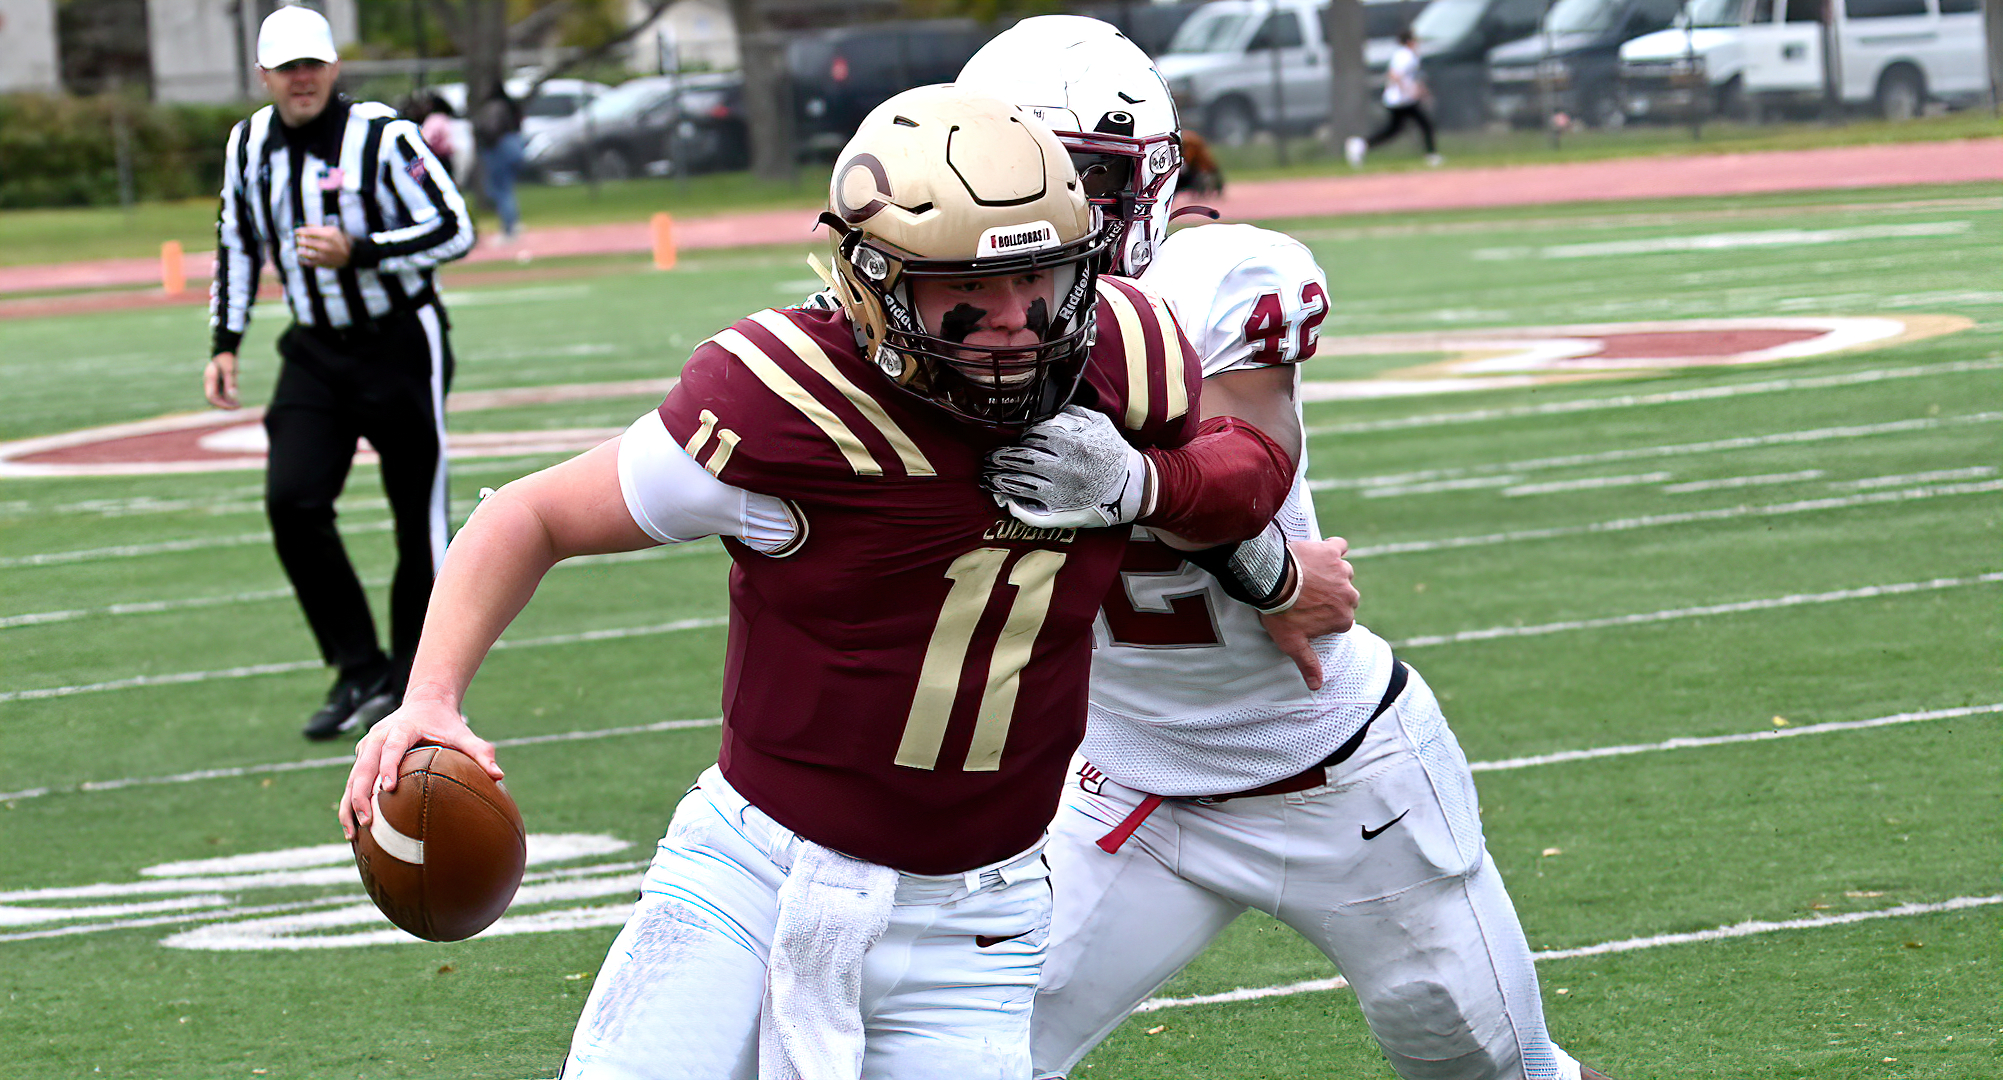 Cooper Mattern shakes off a Hamline tackler in the second half of the Cobbers' win over the Pipers. Mattern threw for a school-record 401 yards.